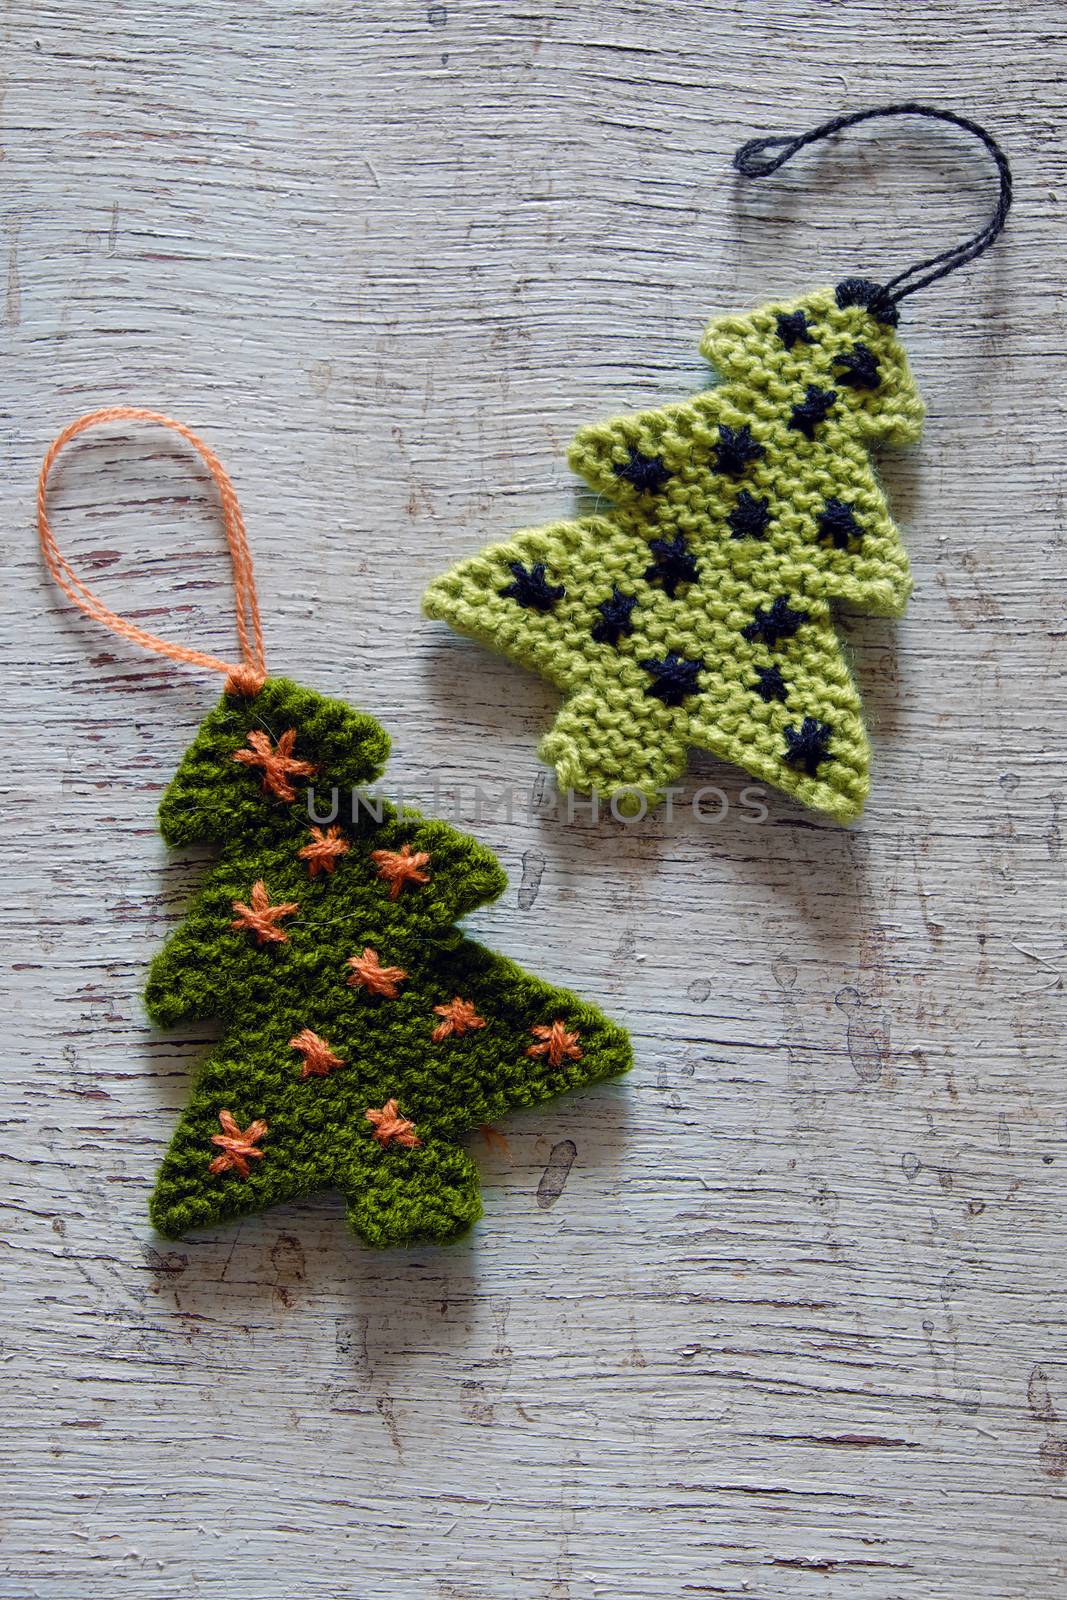 Knitted xmas tree on wooden background, Christmas trees knit from green yarn for holiday season